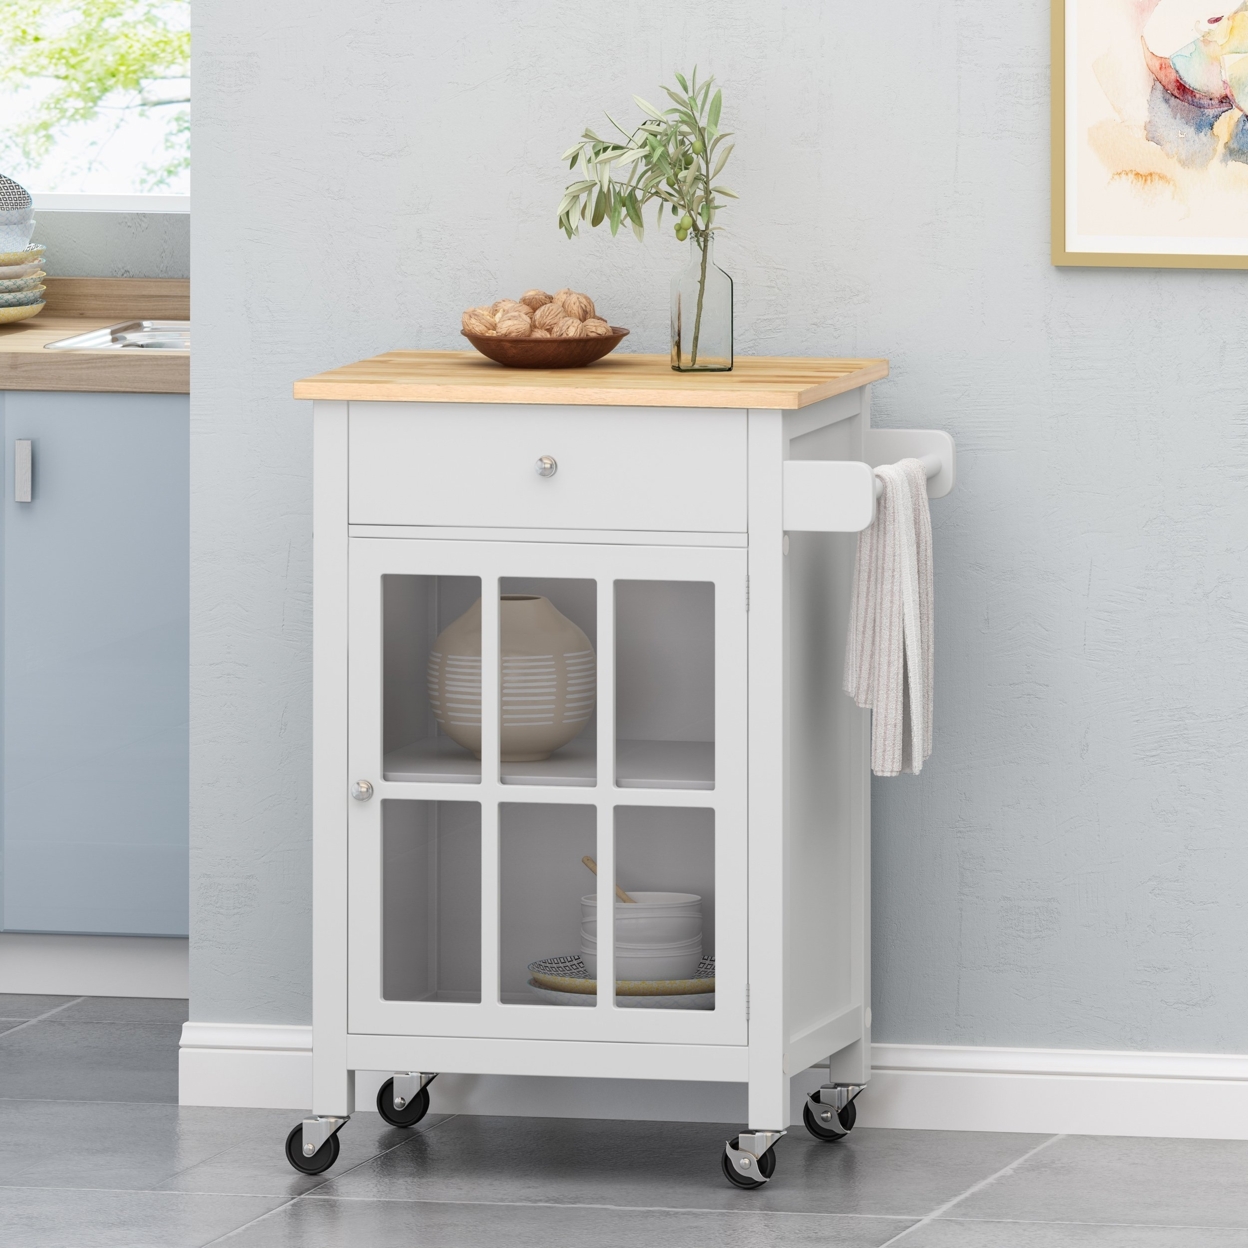 Medway Contemporary Glass Paneled Kitchen Cart - White/natural